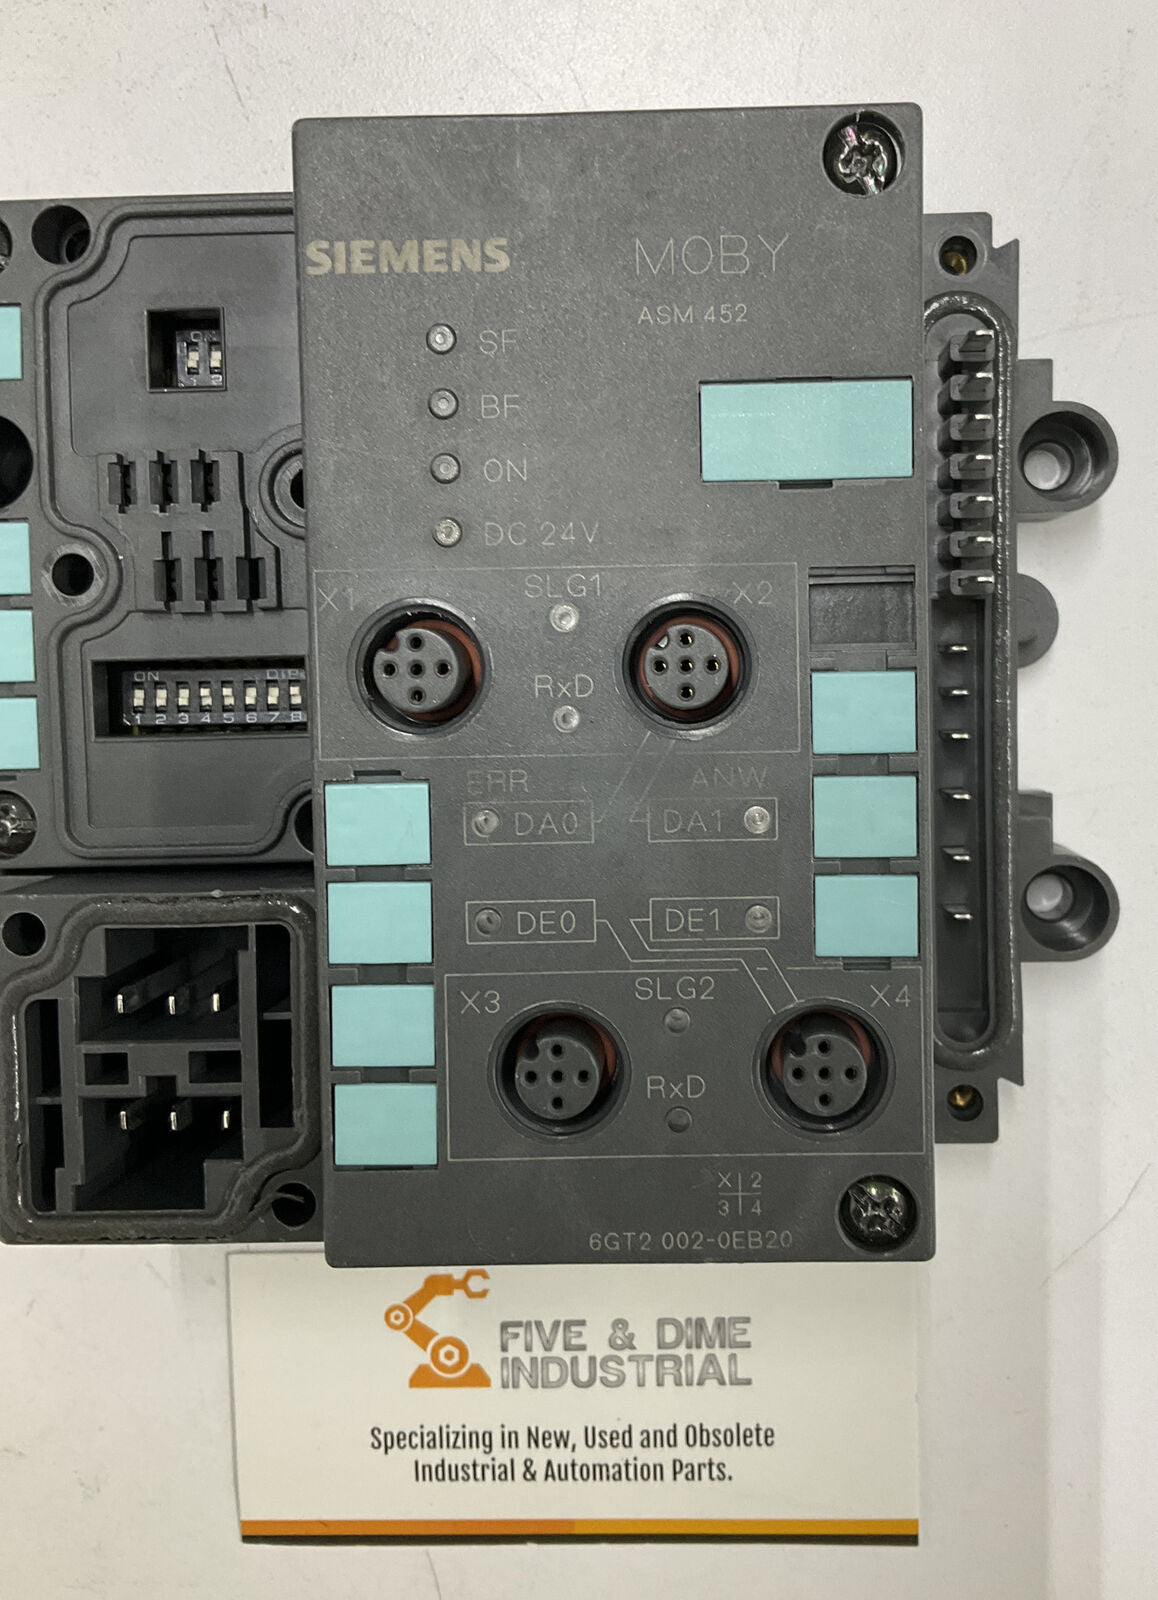 Siemens 6GT2-002-OEB20 MOBY ASM 452 Module with Base (CL358) - 0